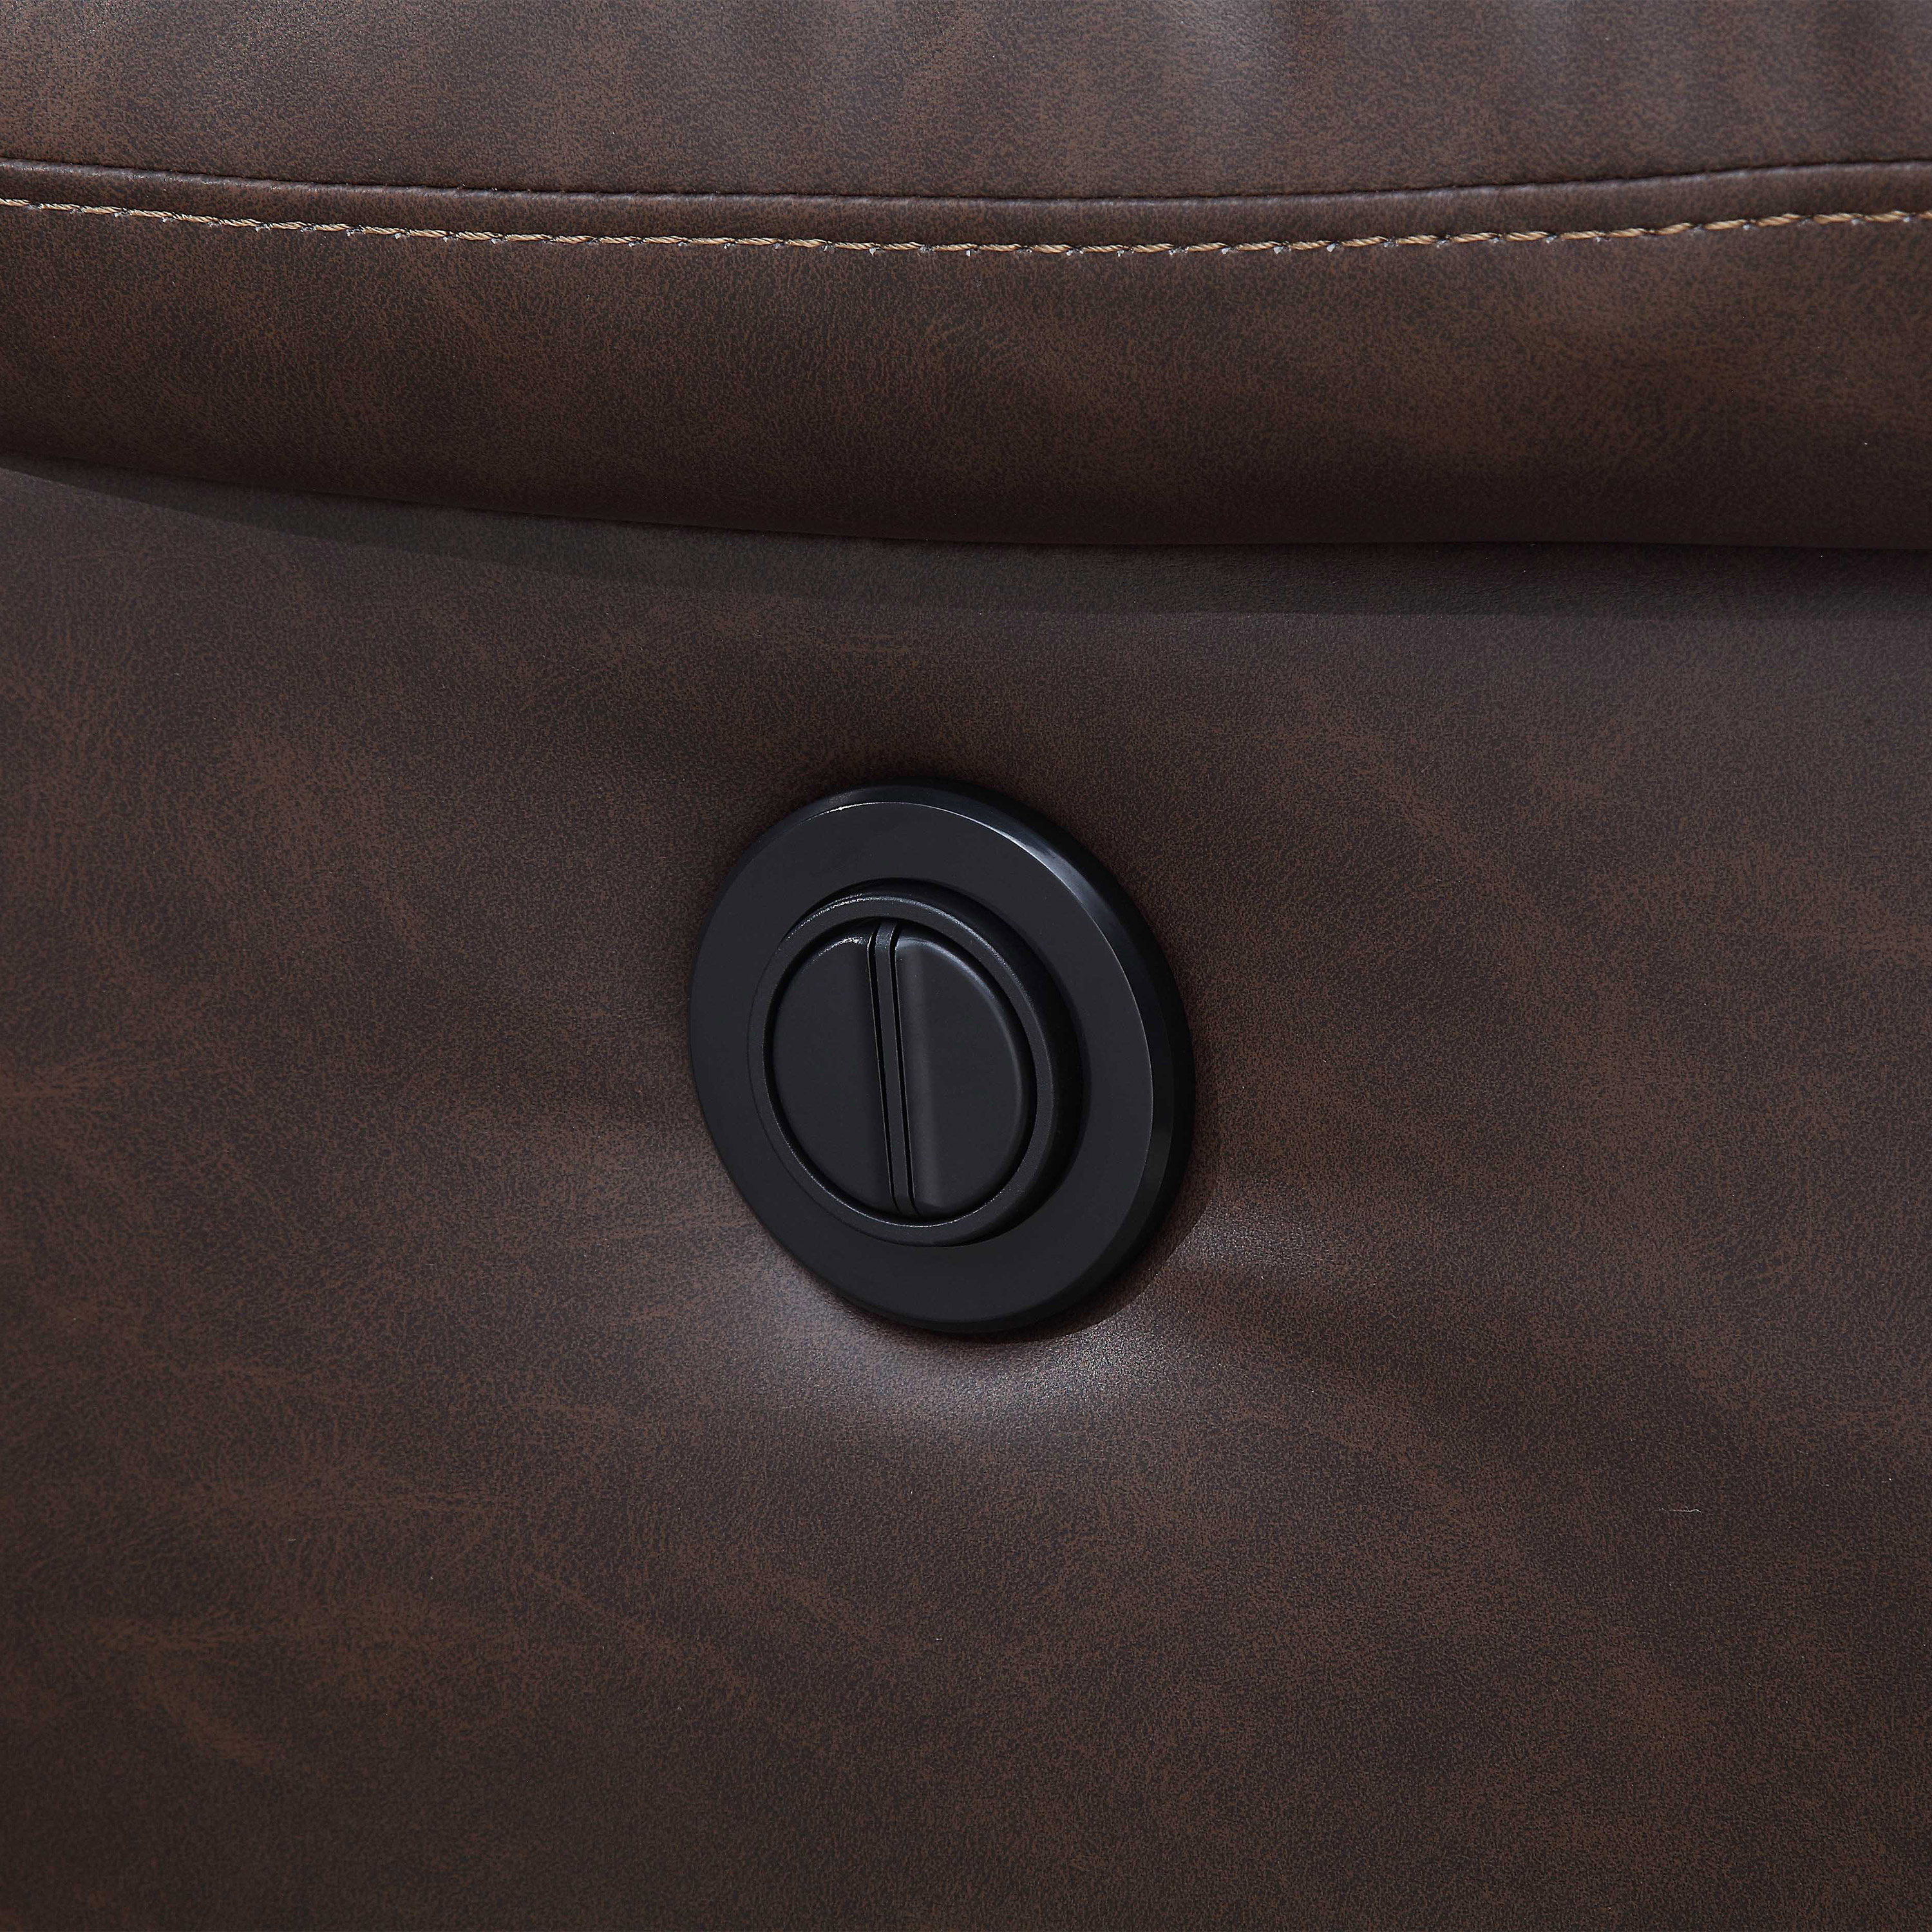 Serta Push-Button Power Recliner with Deep Body Cushions, Brown Faux Leather Upholstery - image 4 of 9